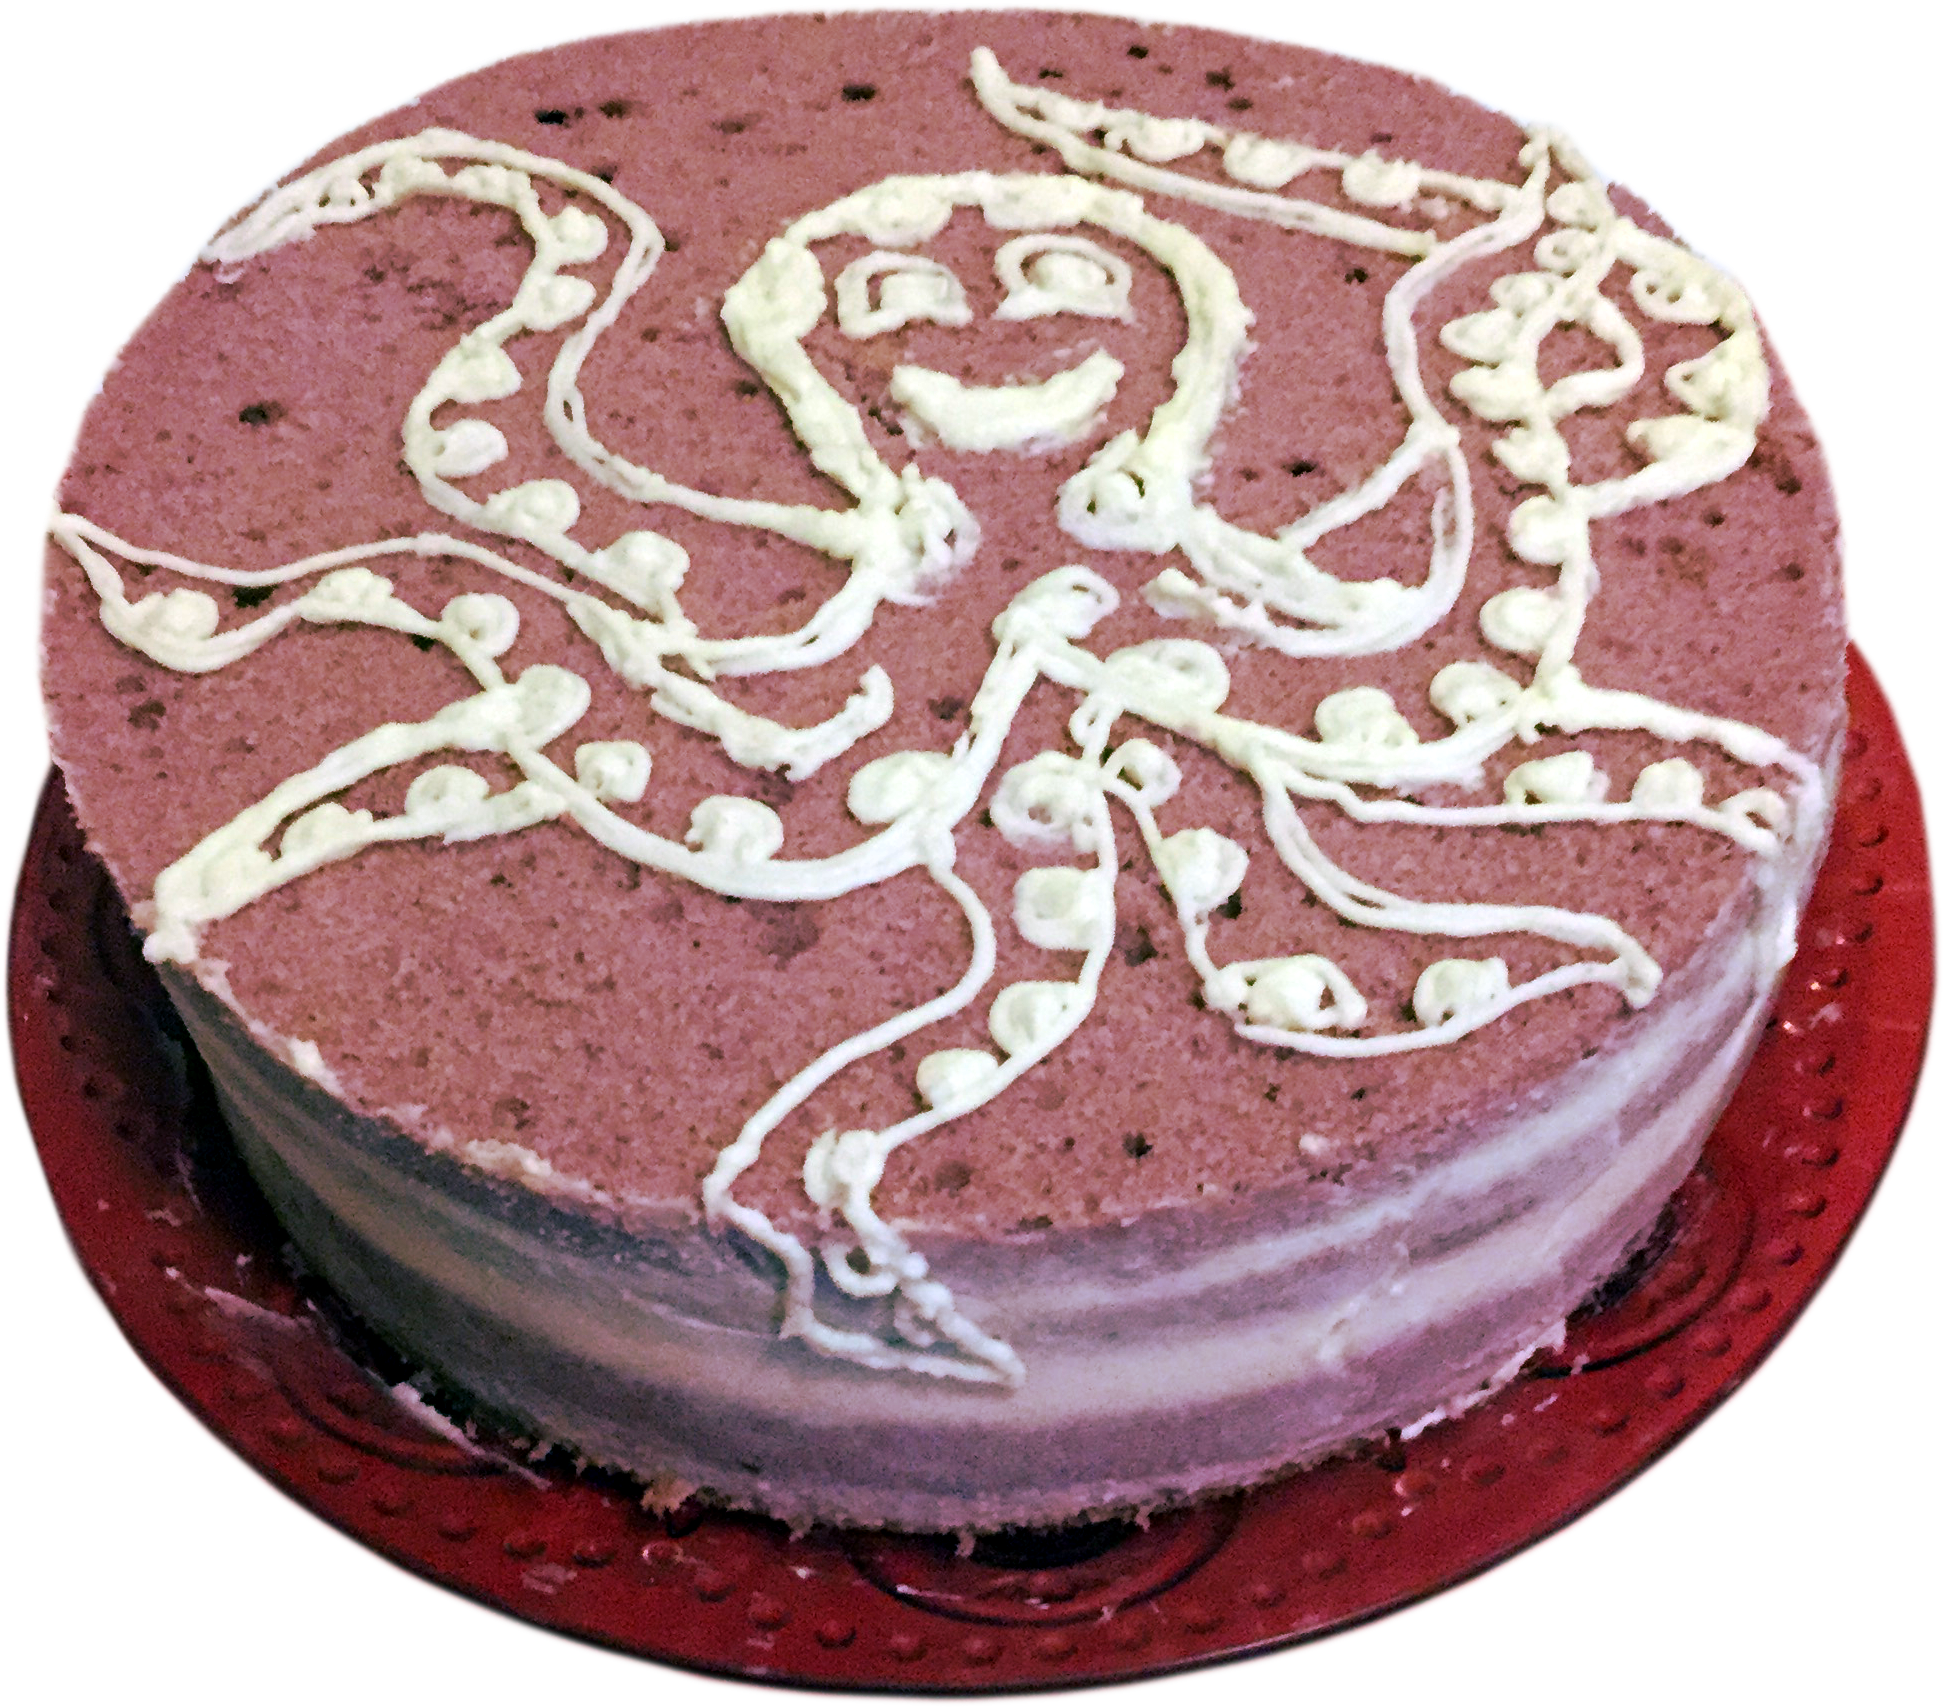 A Cake With A Octopus Design On It